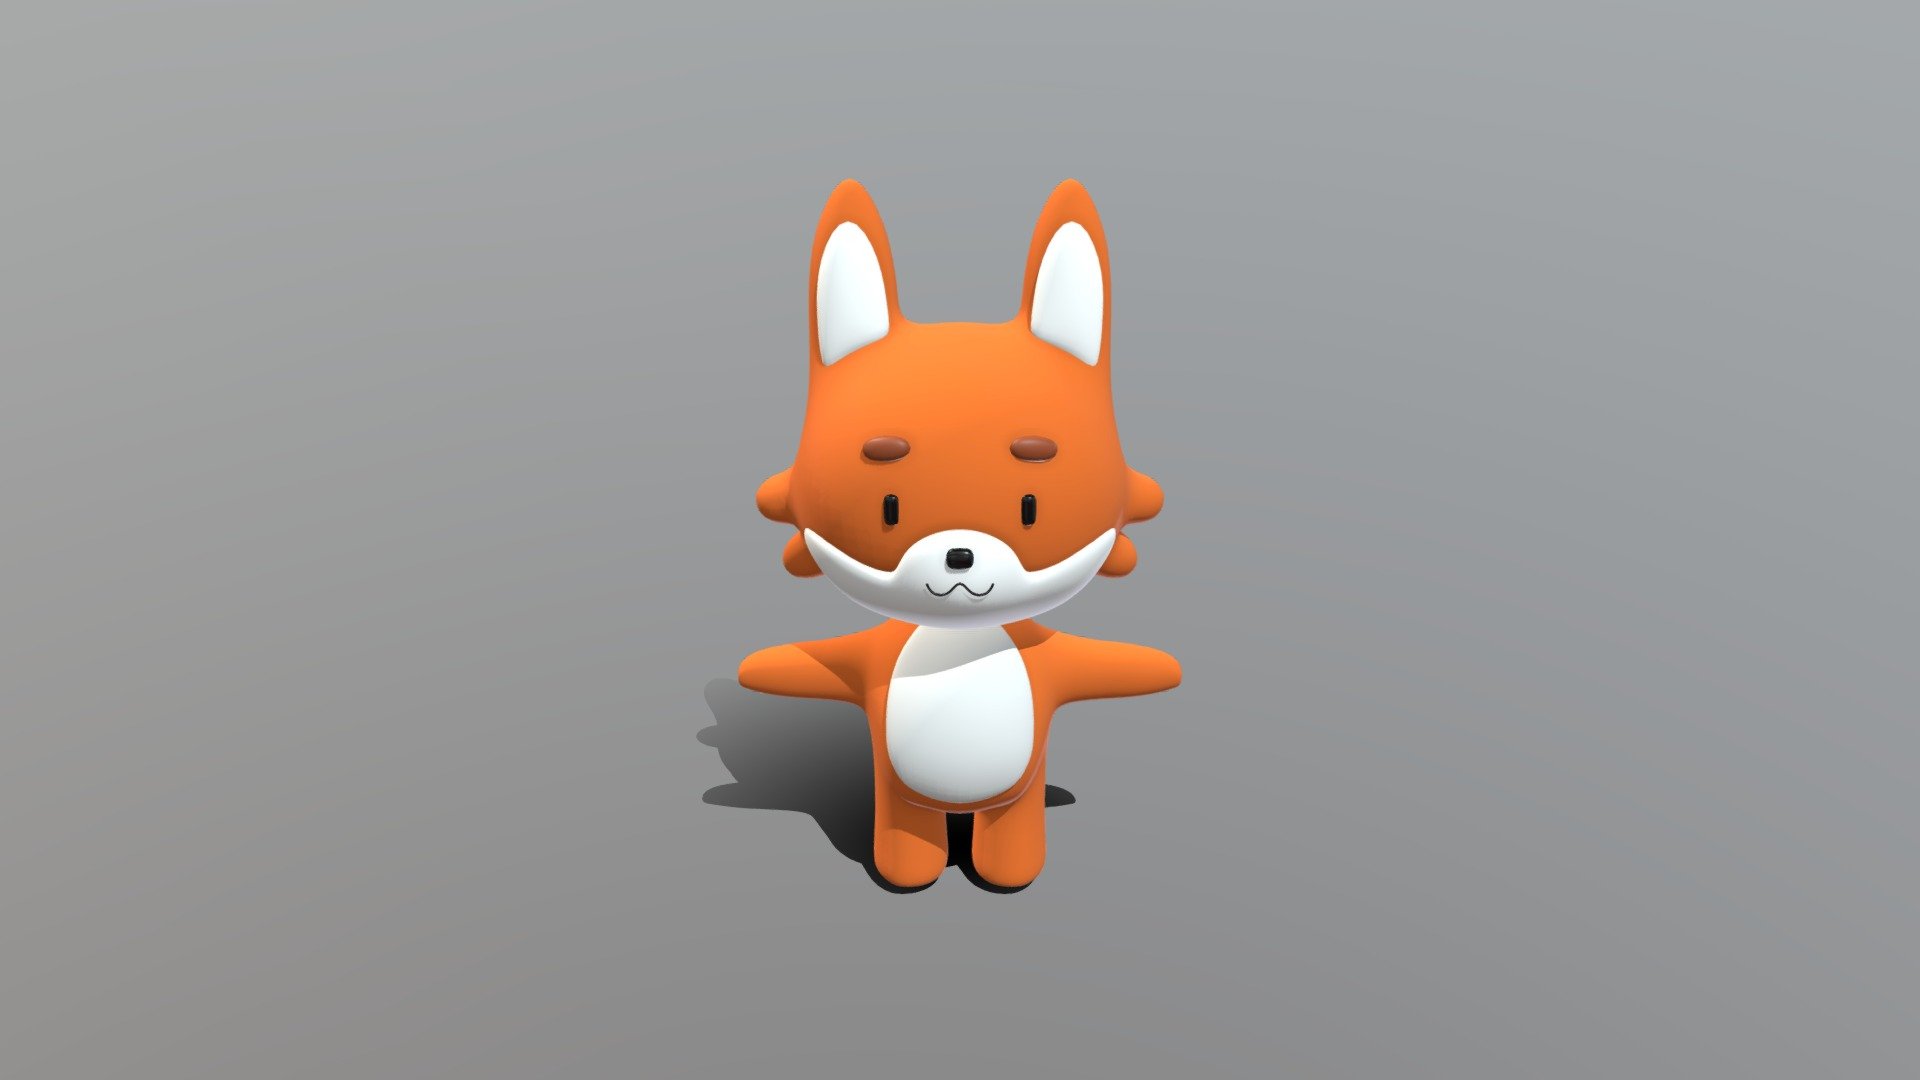 A cute 3D cartoon fox character I made a while back. Easy to rig and base T-pose for quick adjustments.

This is one of my very first animal like creations and if there are any issues with the model itself, Please leave a comment and I will fix it if necessary 3d model